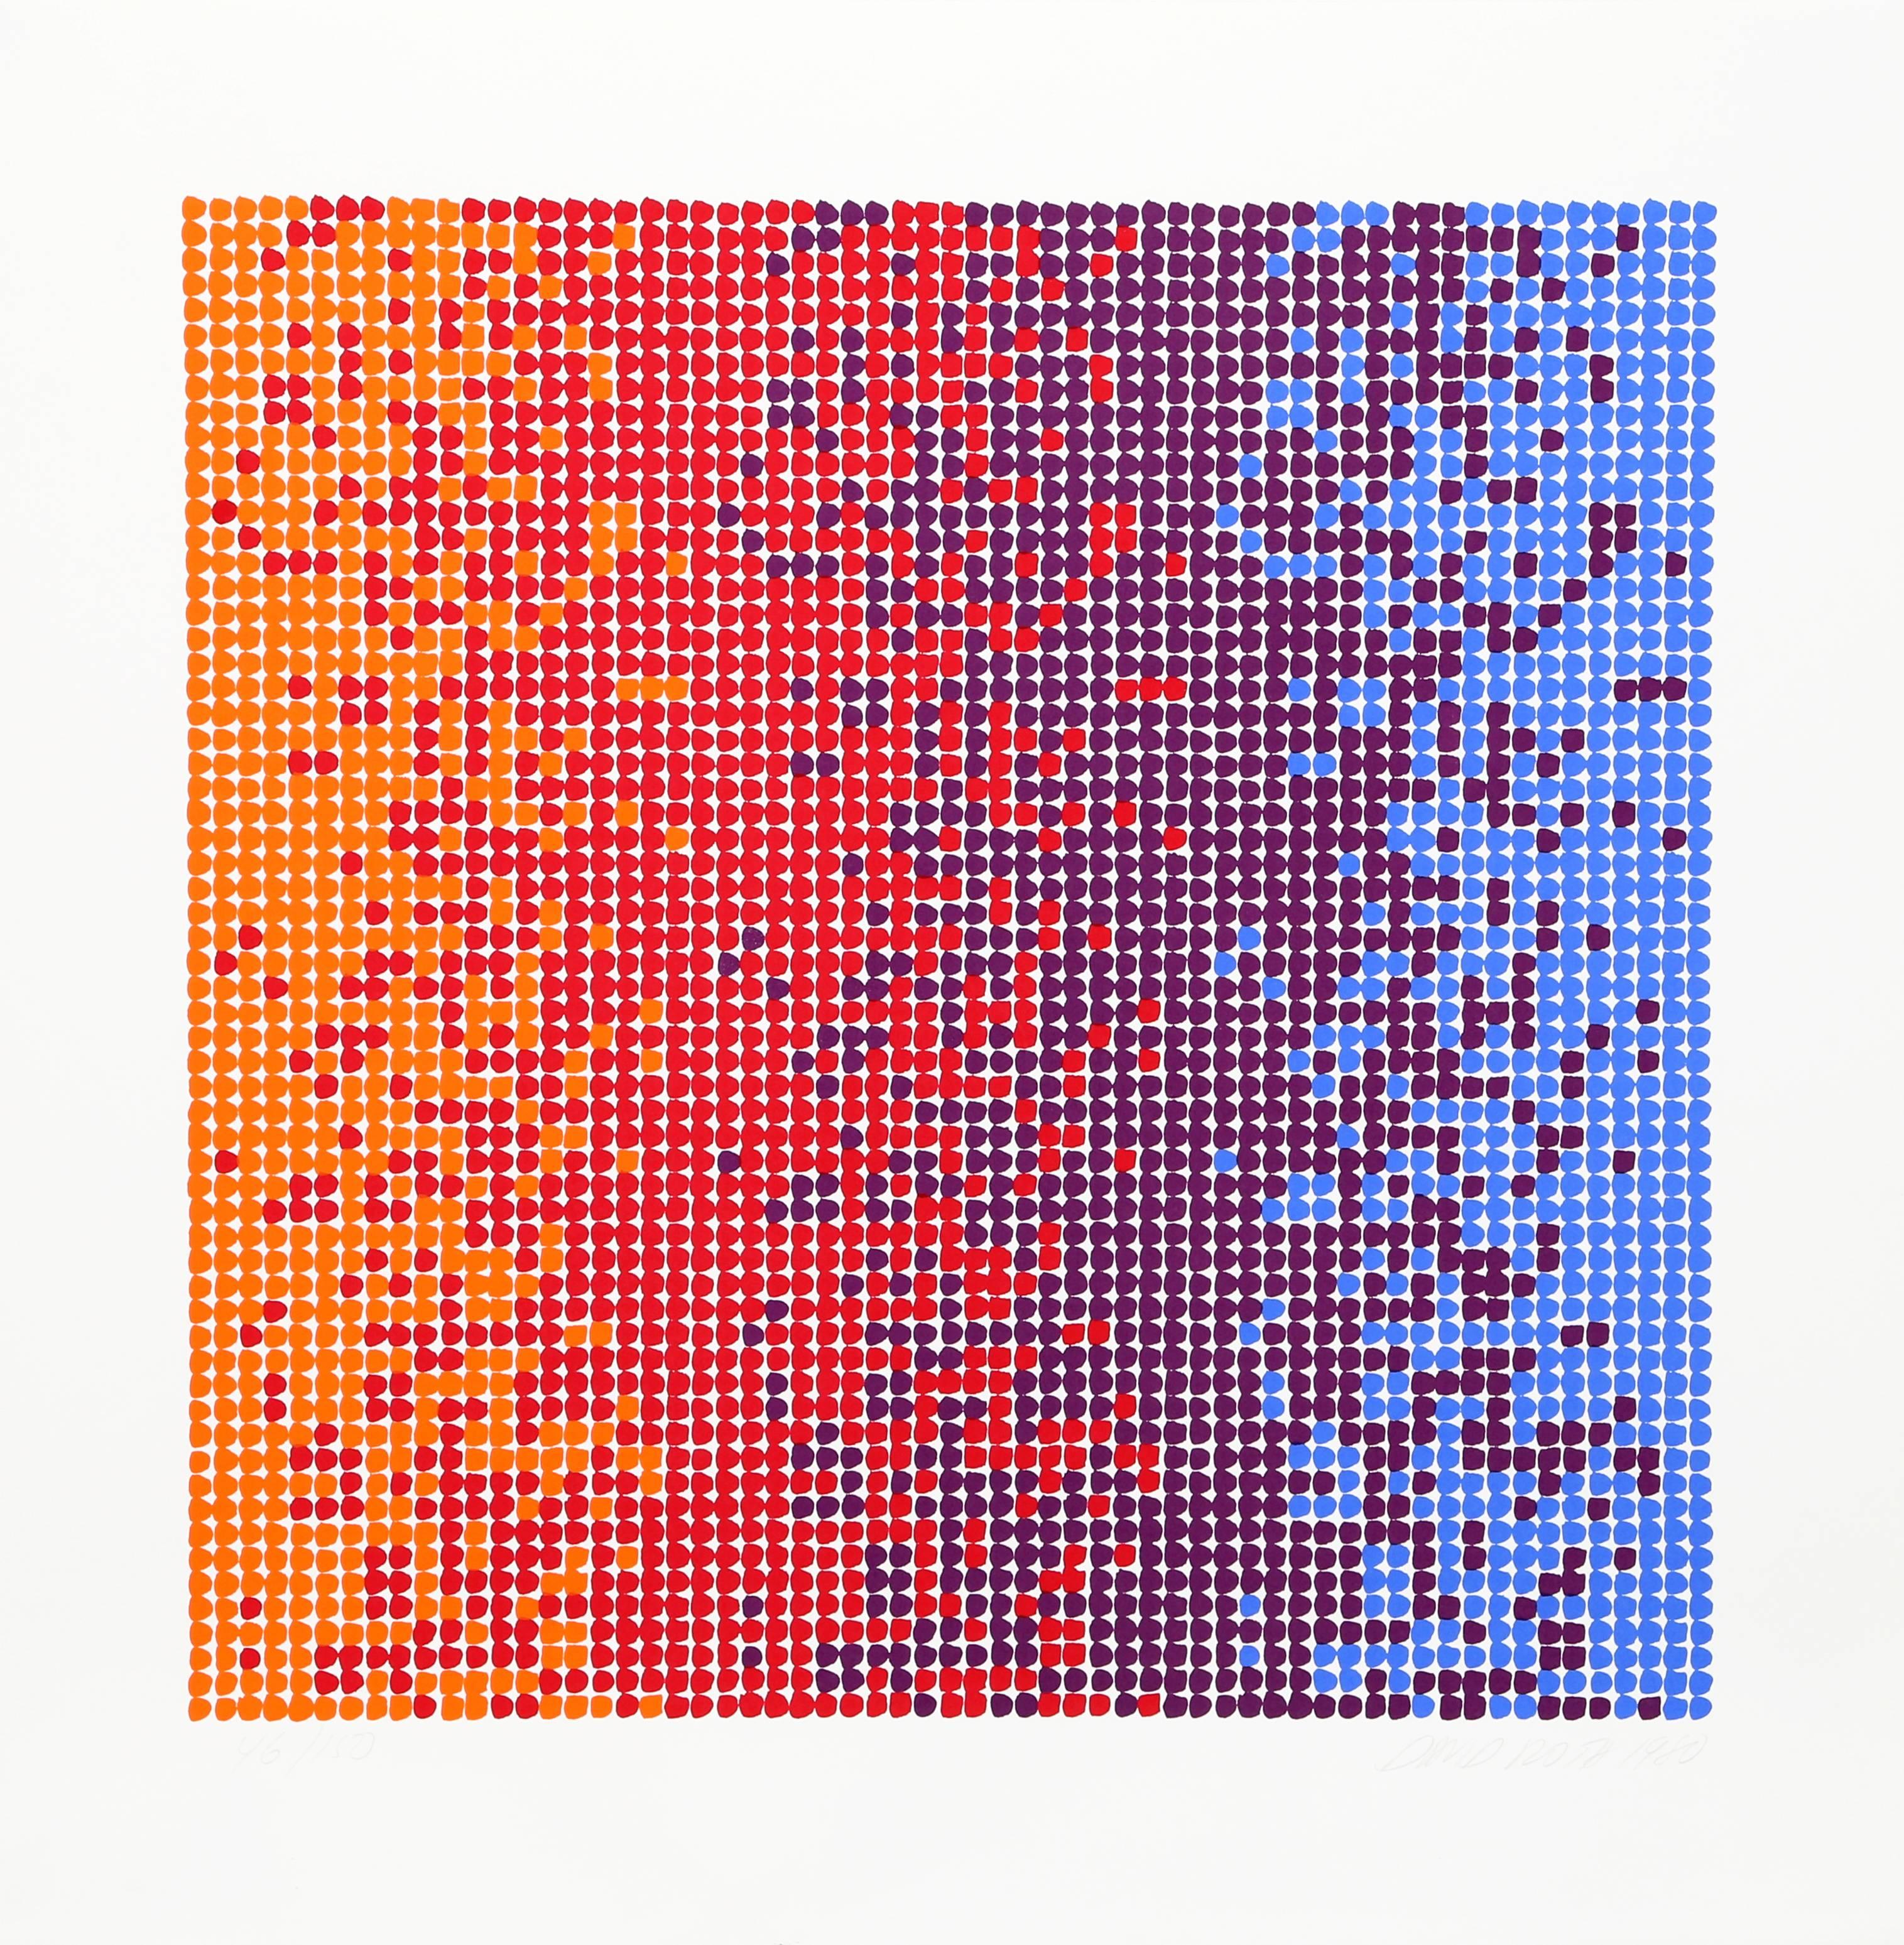 This screenprint was created by American artist David Roth. Roth's images are proportioned according to a strict mathematical formula - the pictures are composed according to horizontal and vertical divisions on the graph paper. The optical quality